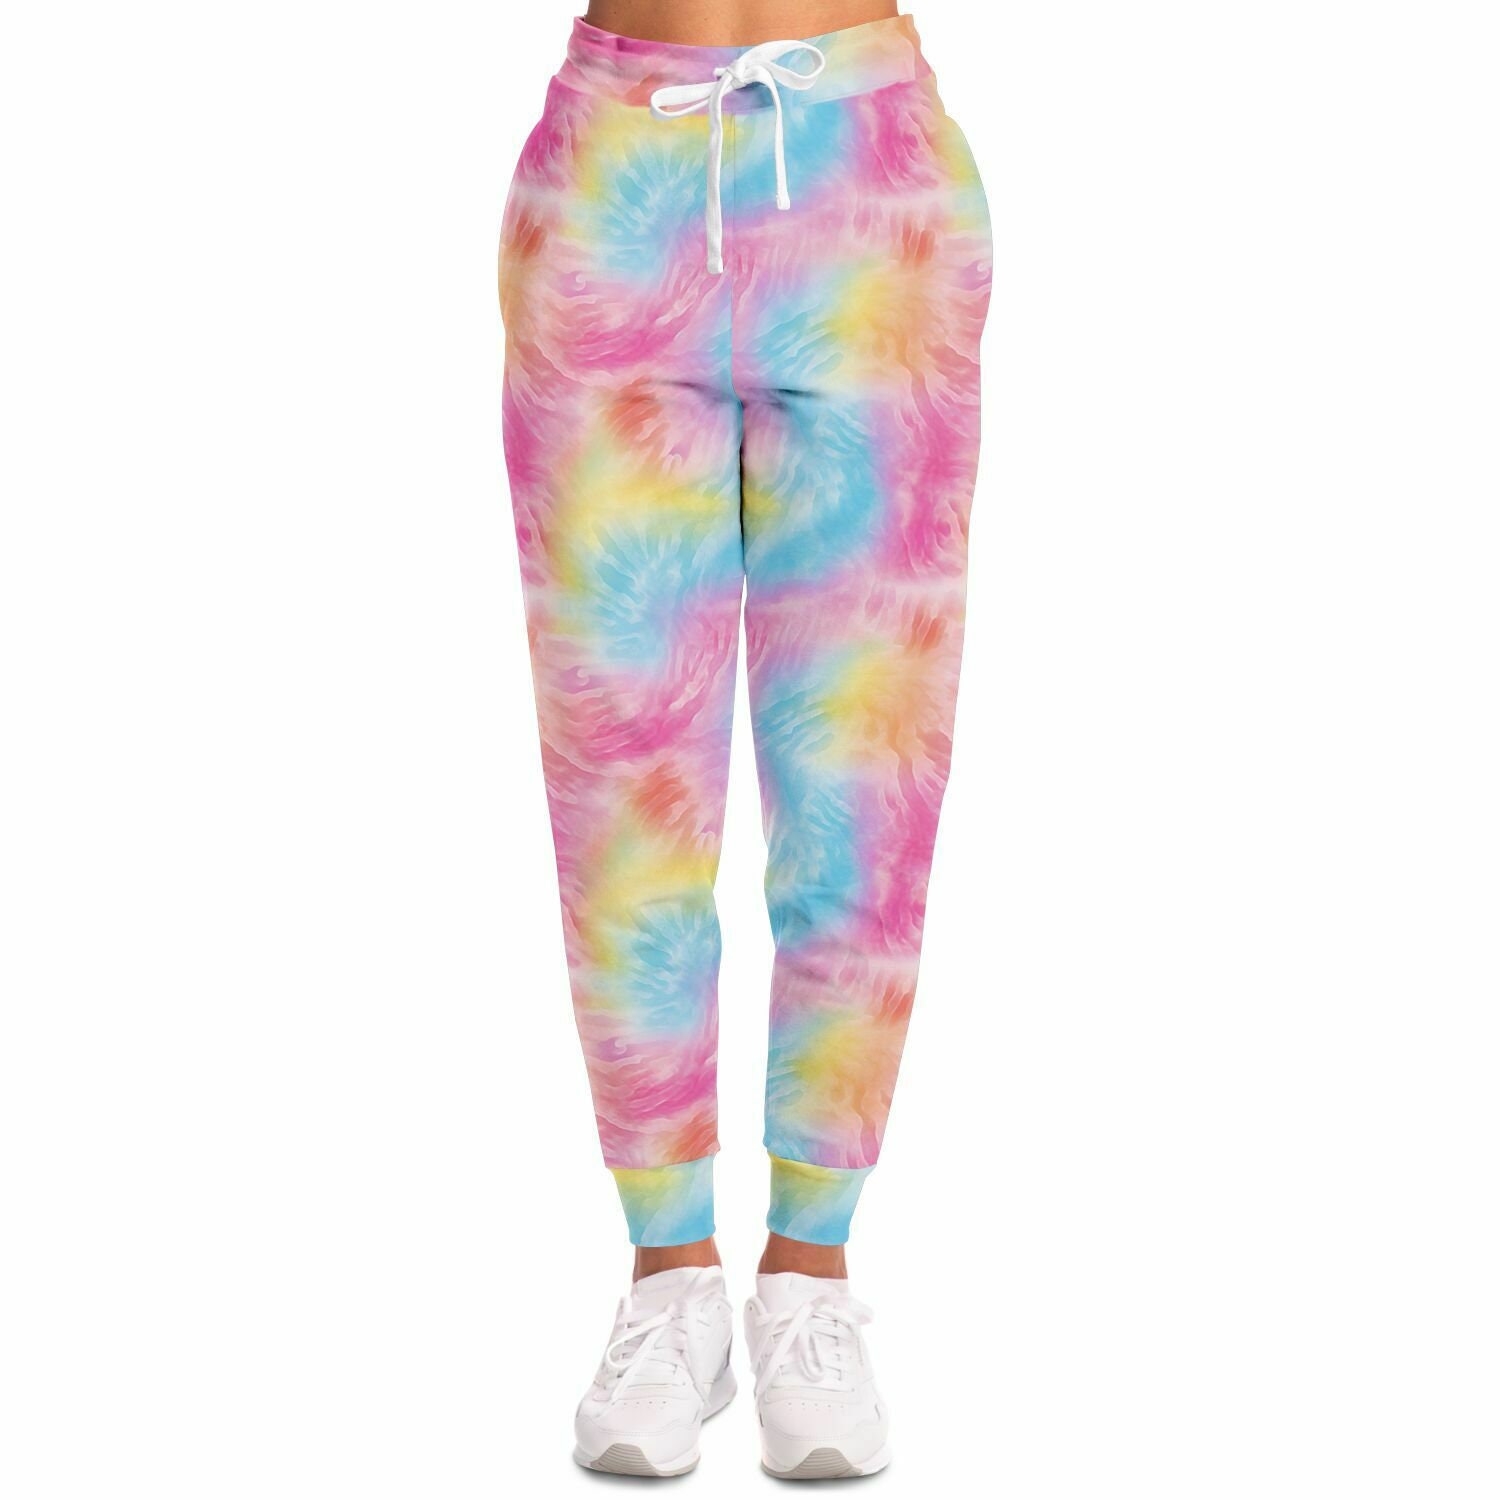 Pink and White Ombre Yoga Leggings Women, Gradient Tie Dye High Waiste –  Starcove Fashion